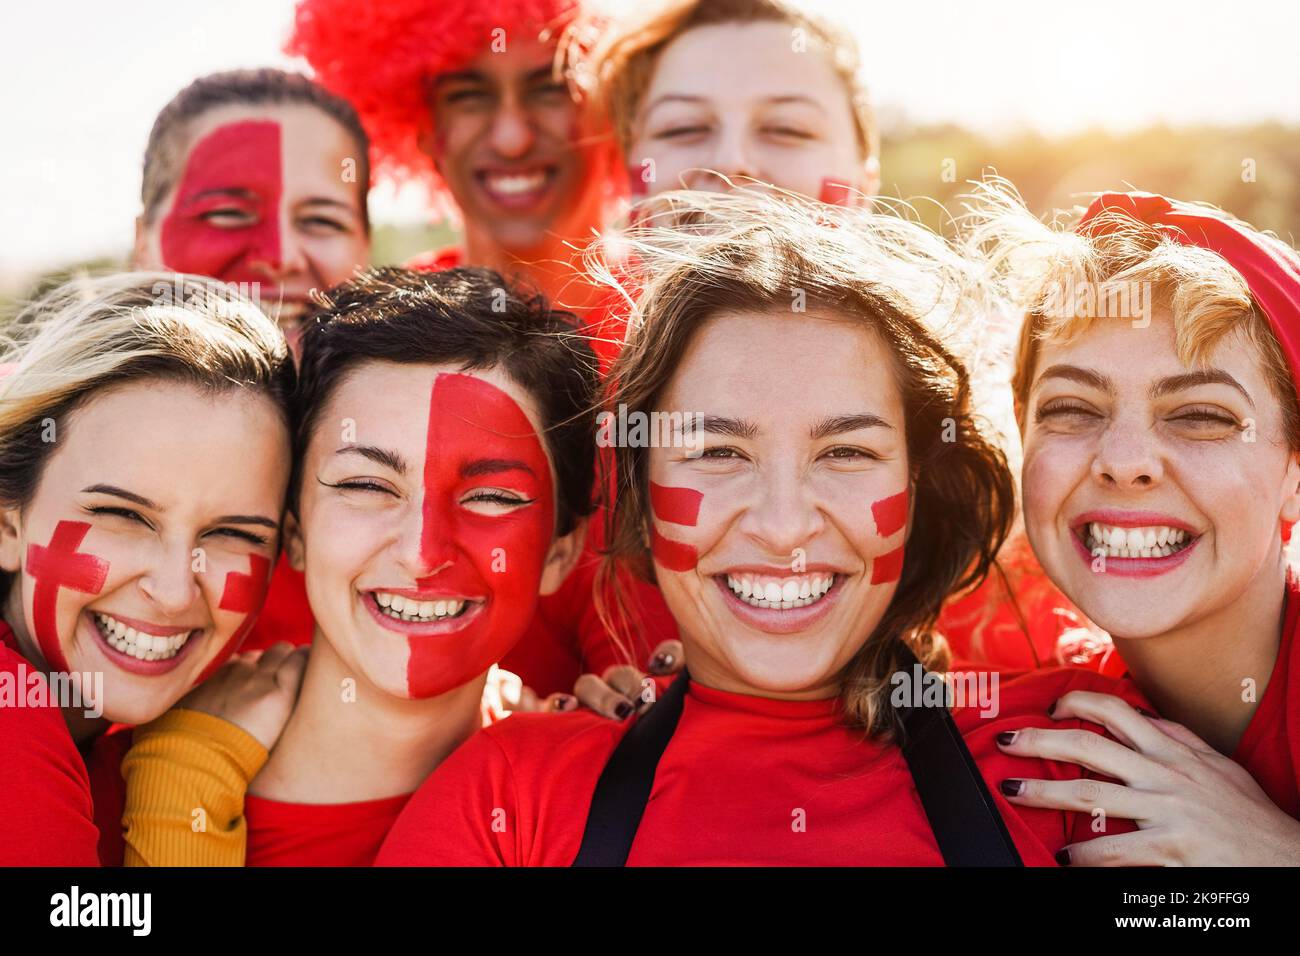 Red sport fans screaming while supporting their team - Football supporters having fun at competition event - Focus on second girl on right Stock Photo